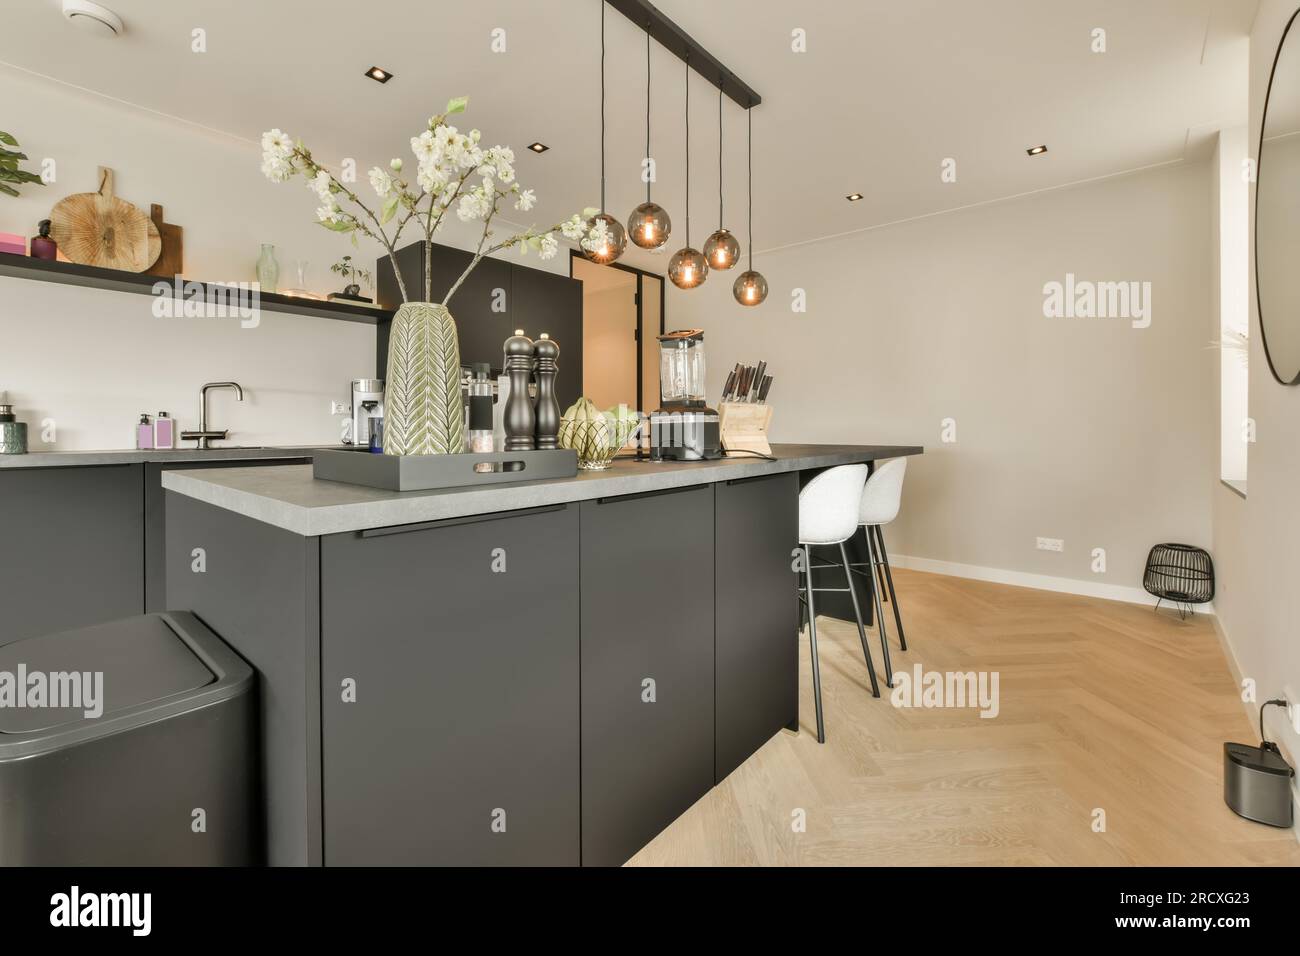 A beautiful kitchen with dark wood cabinets, marble countertops, chairs  sitting at the island, and stainless steel appliances. No brands or names  Stock Photo - Alamy